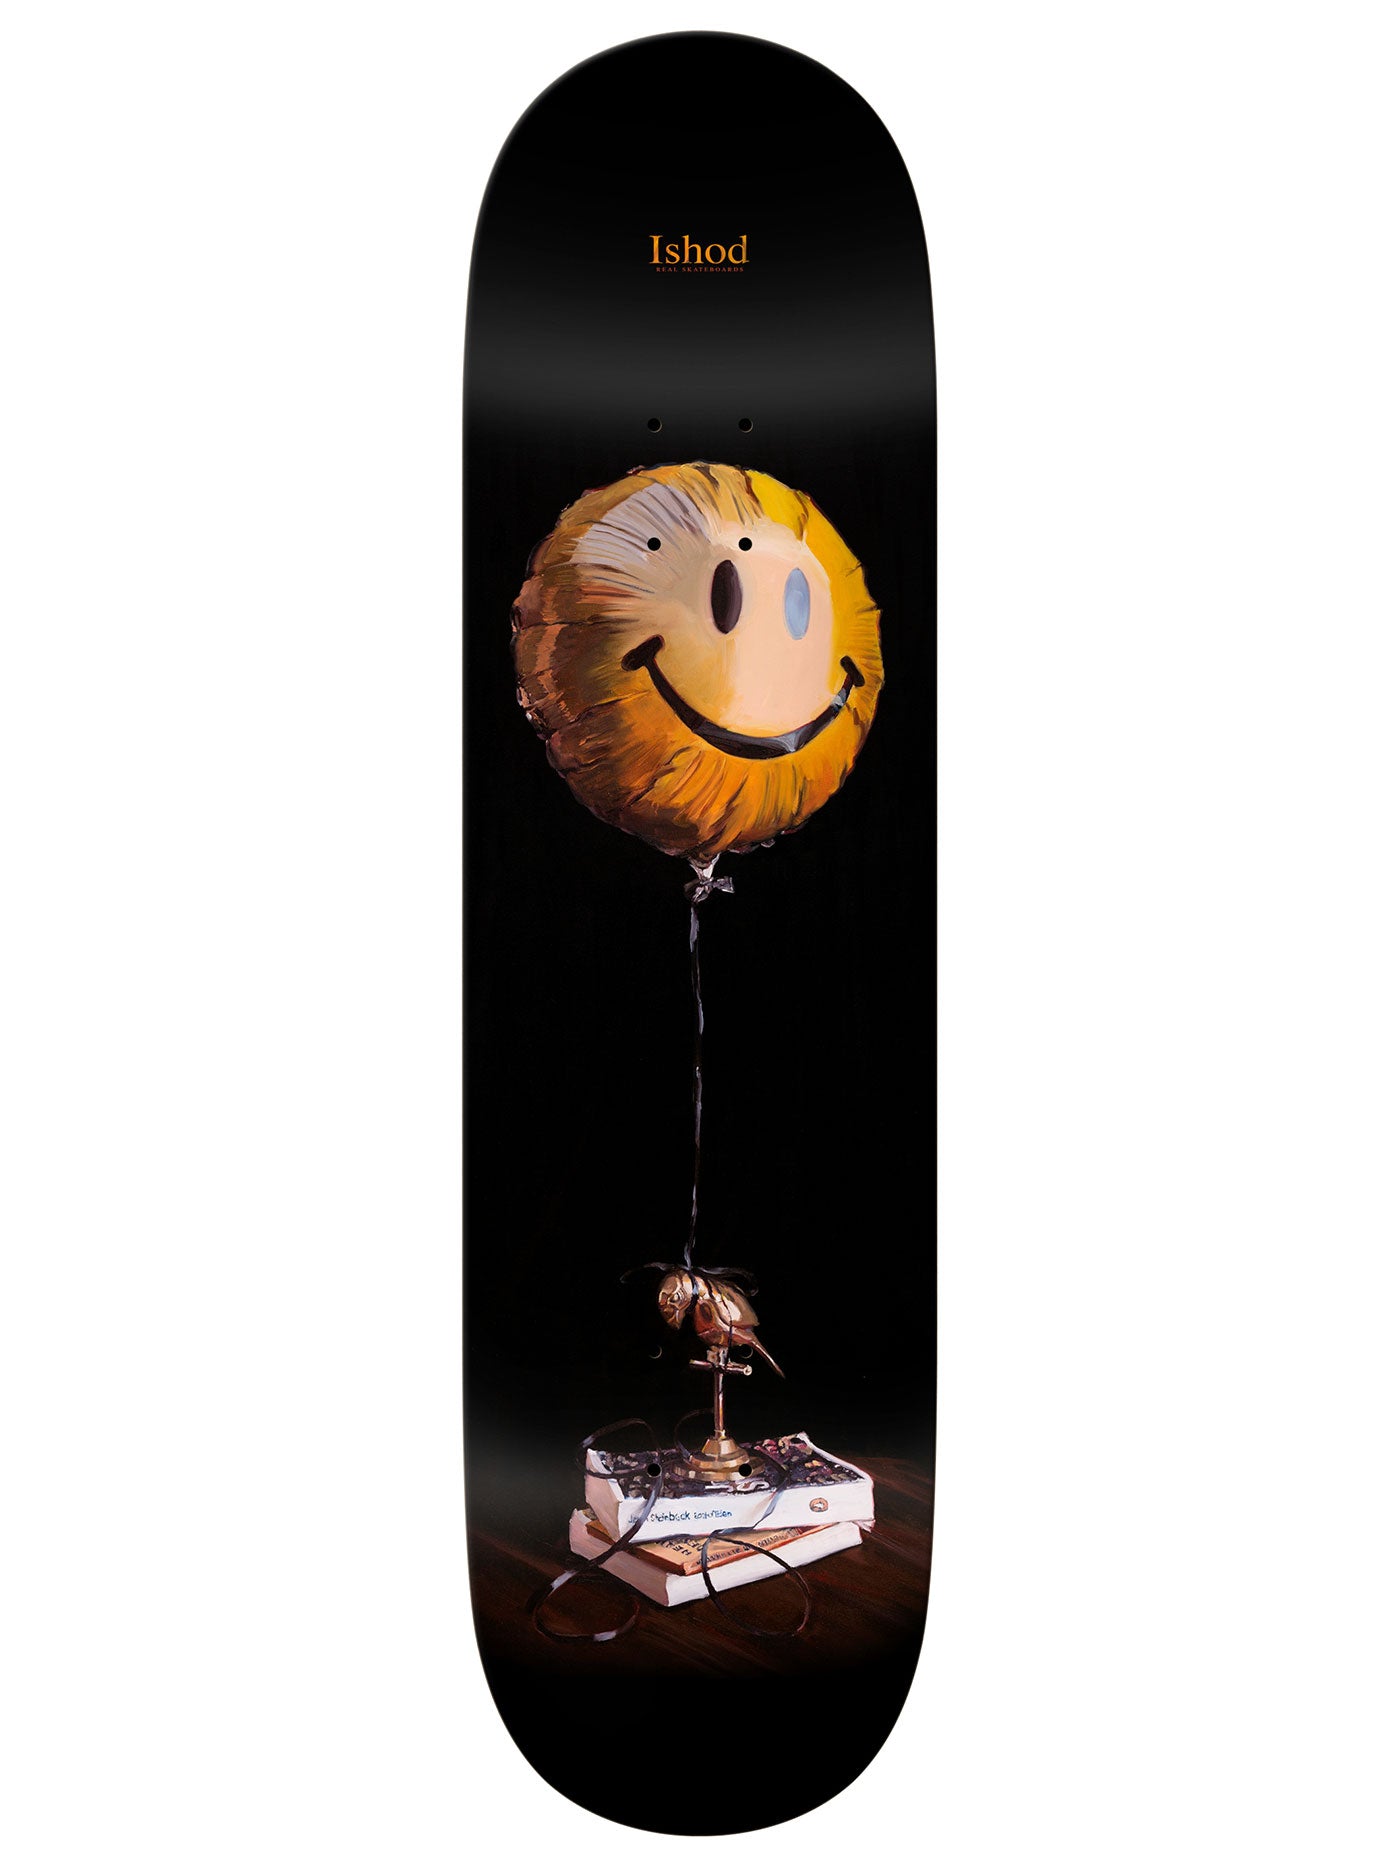 Real Ishod by Kathy Ager 8.12 Skateboard Deck